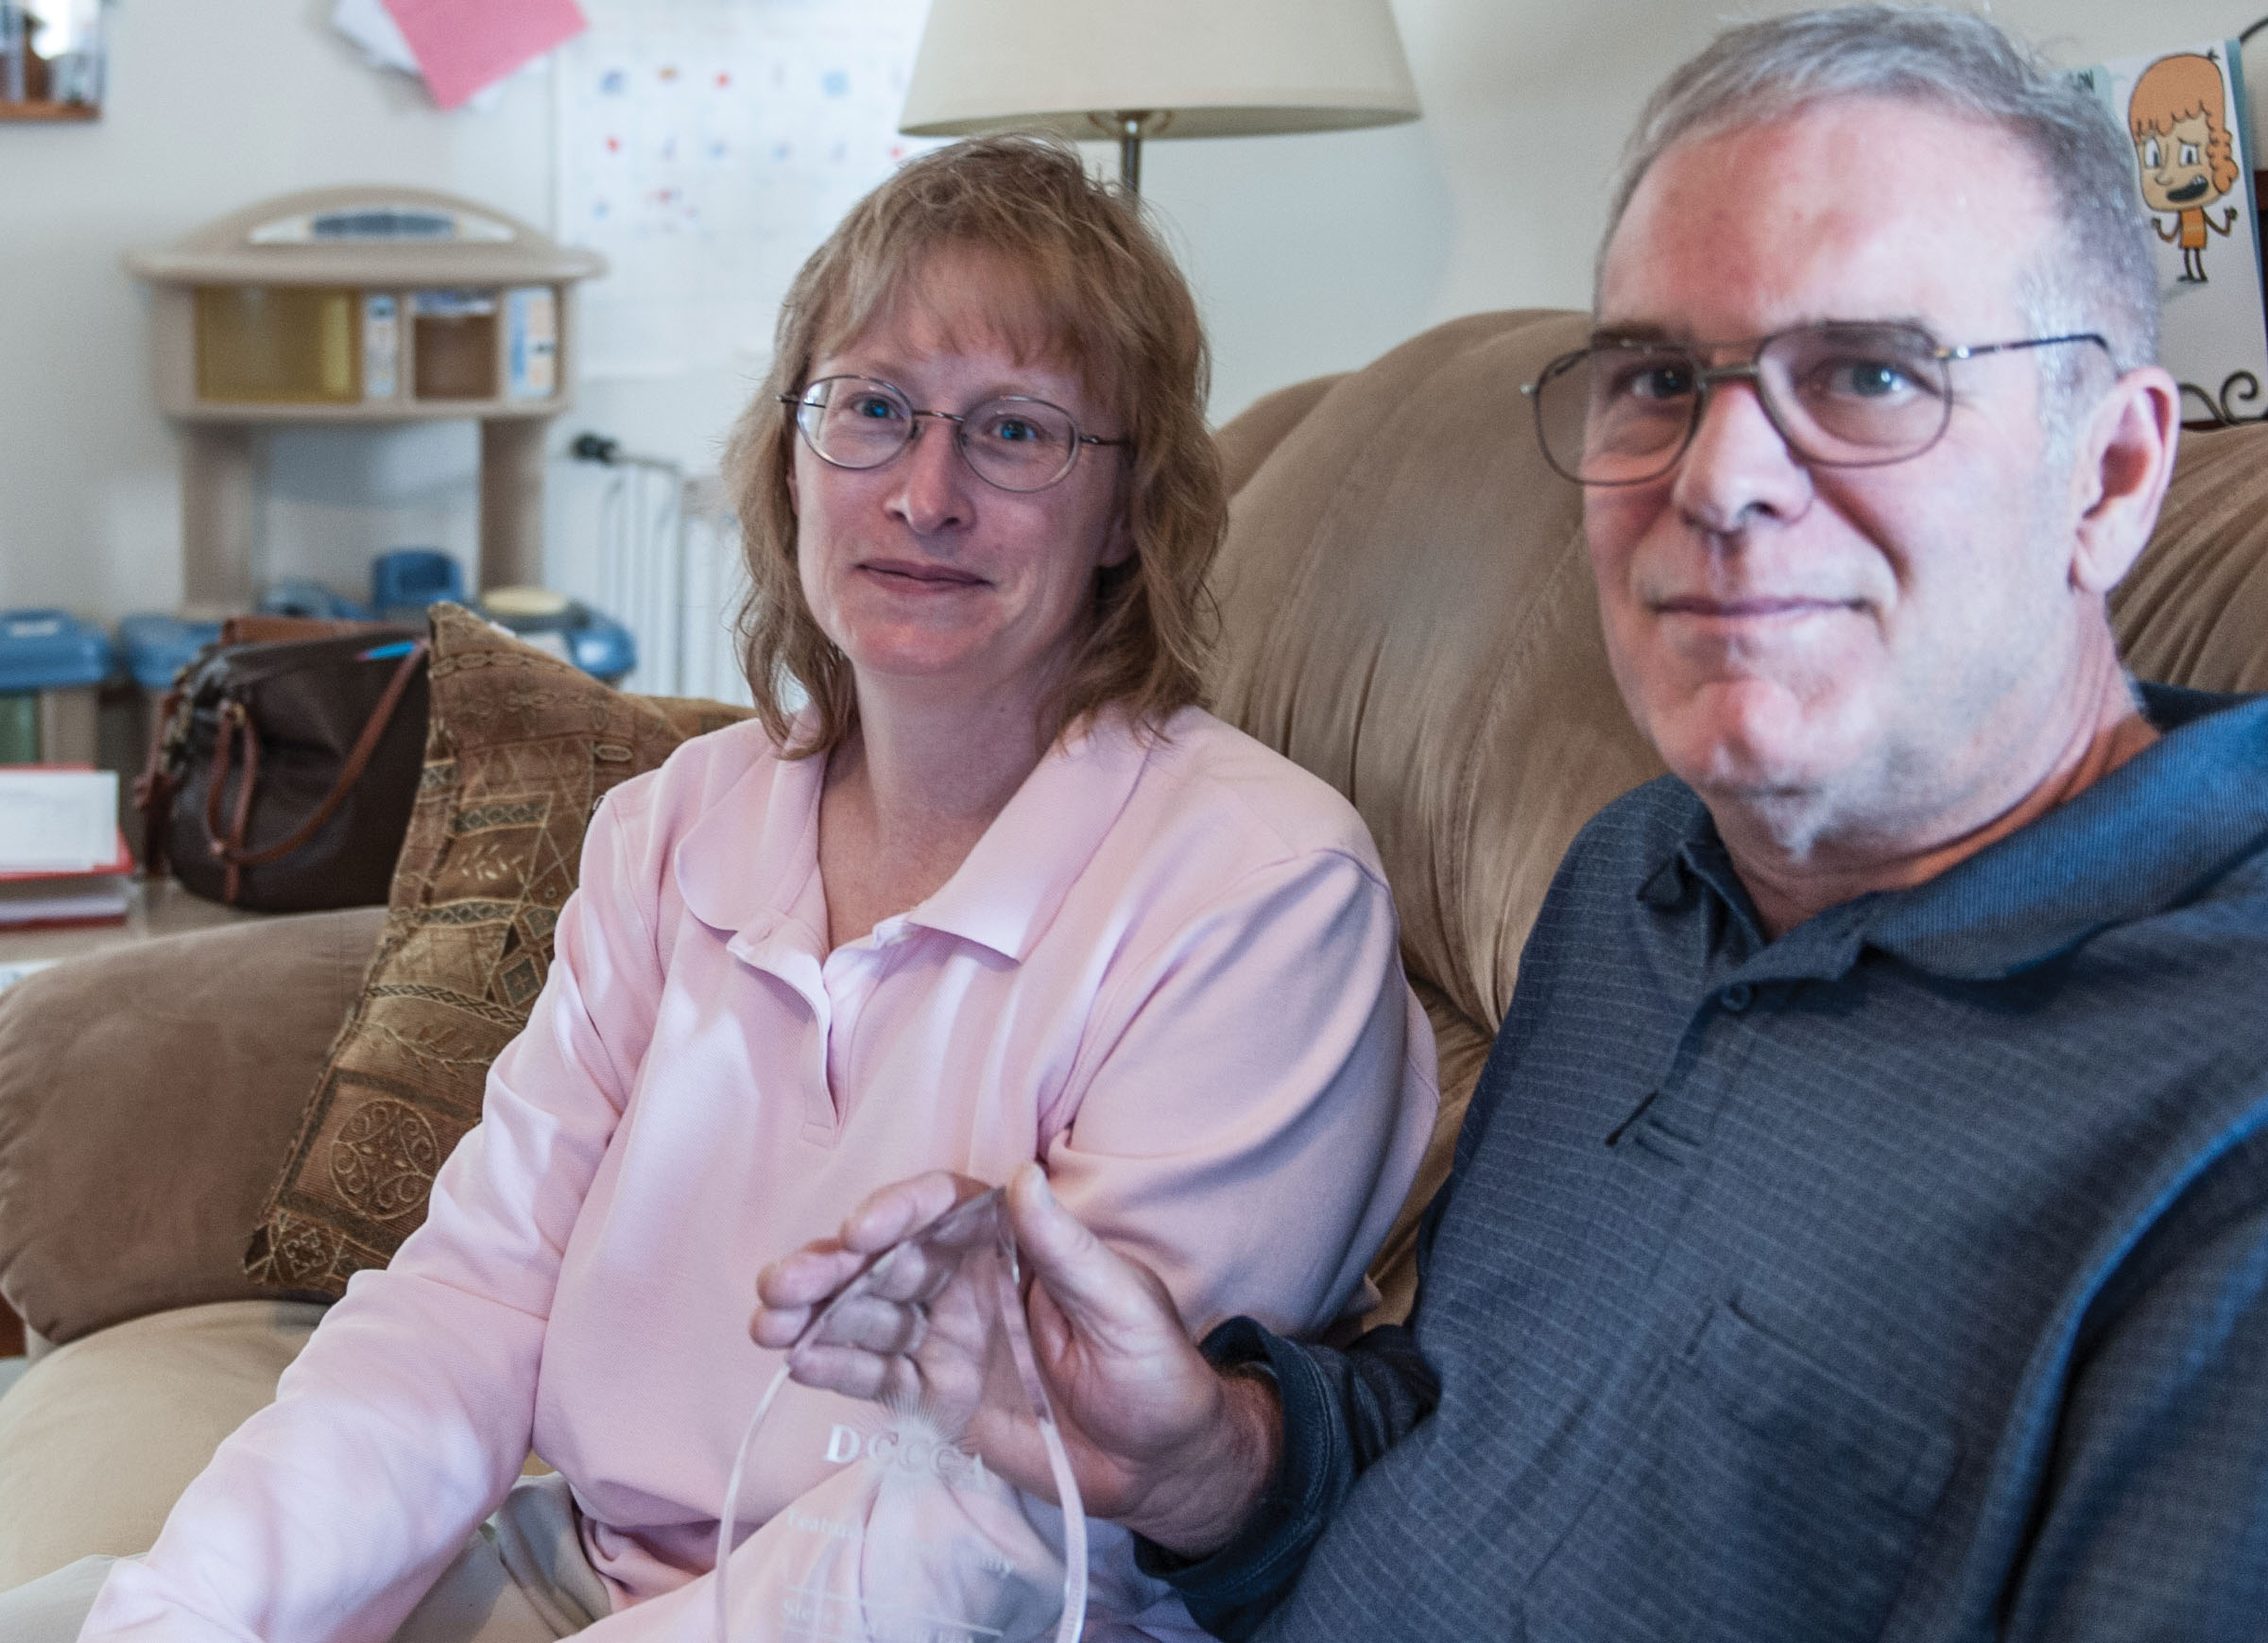 Patti and Steve Fisher were named the Foster Family of 2015 by DCCCA. In their three-and-a- half years as foster parents they have welcomed 25 children into their home.